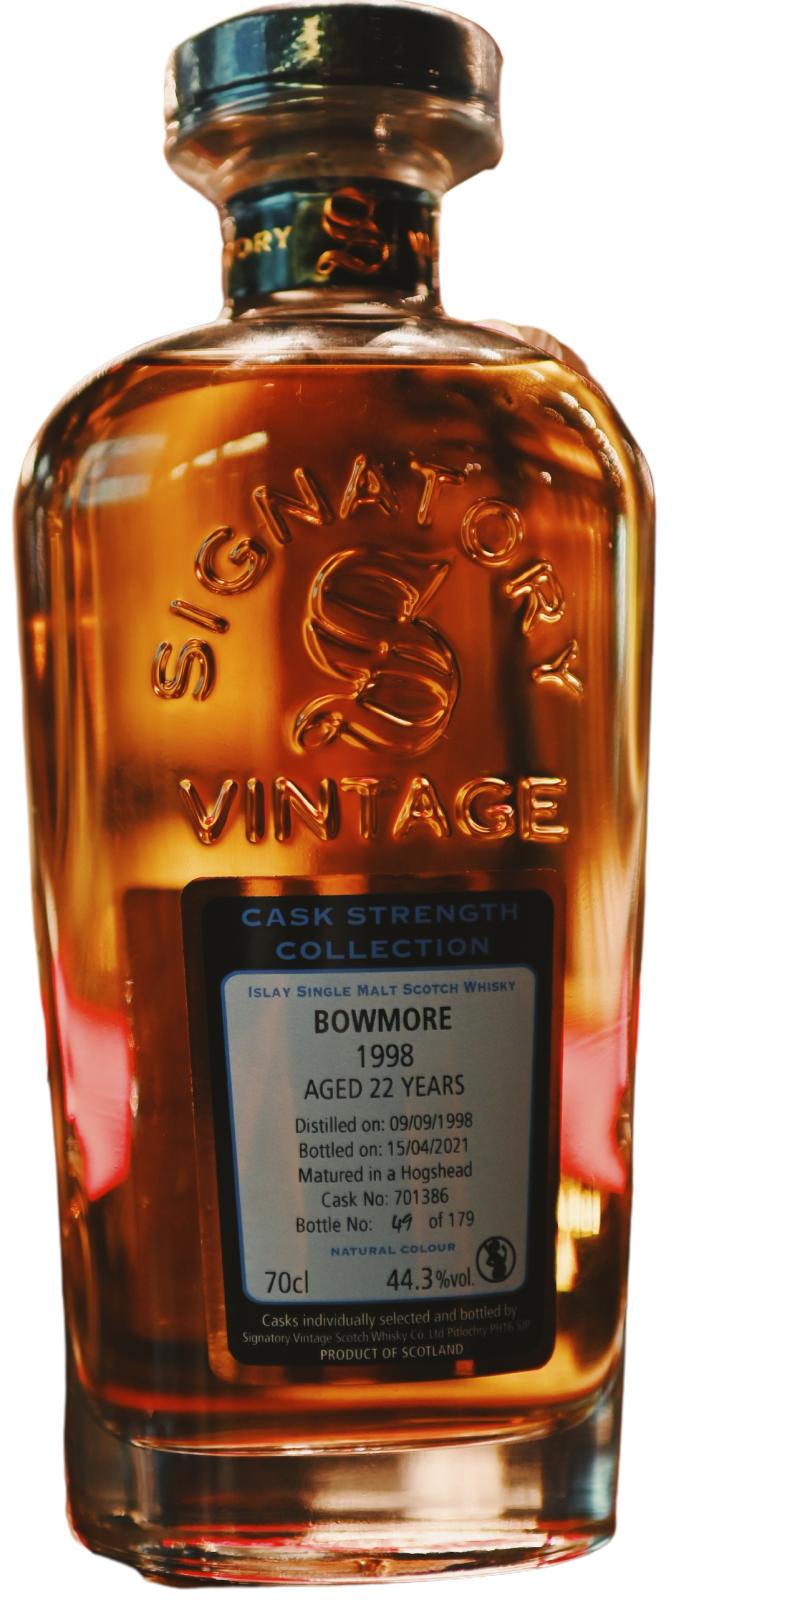 Bowmore 1998 SV Cask Strength Collection Hoghead 44.3% 700ml